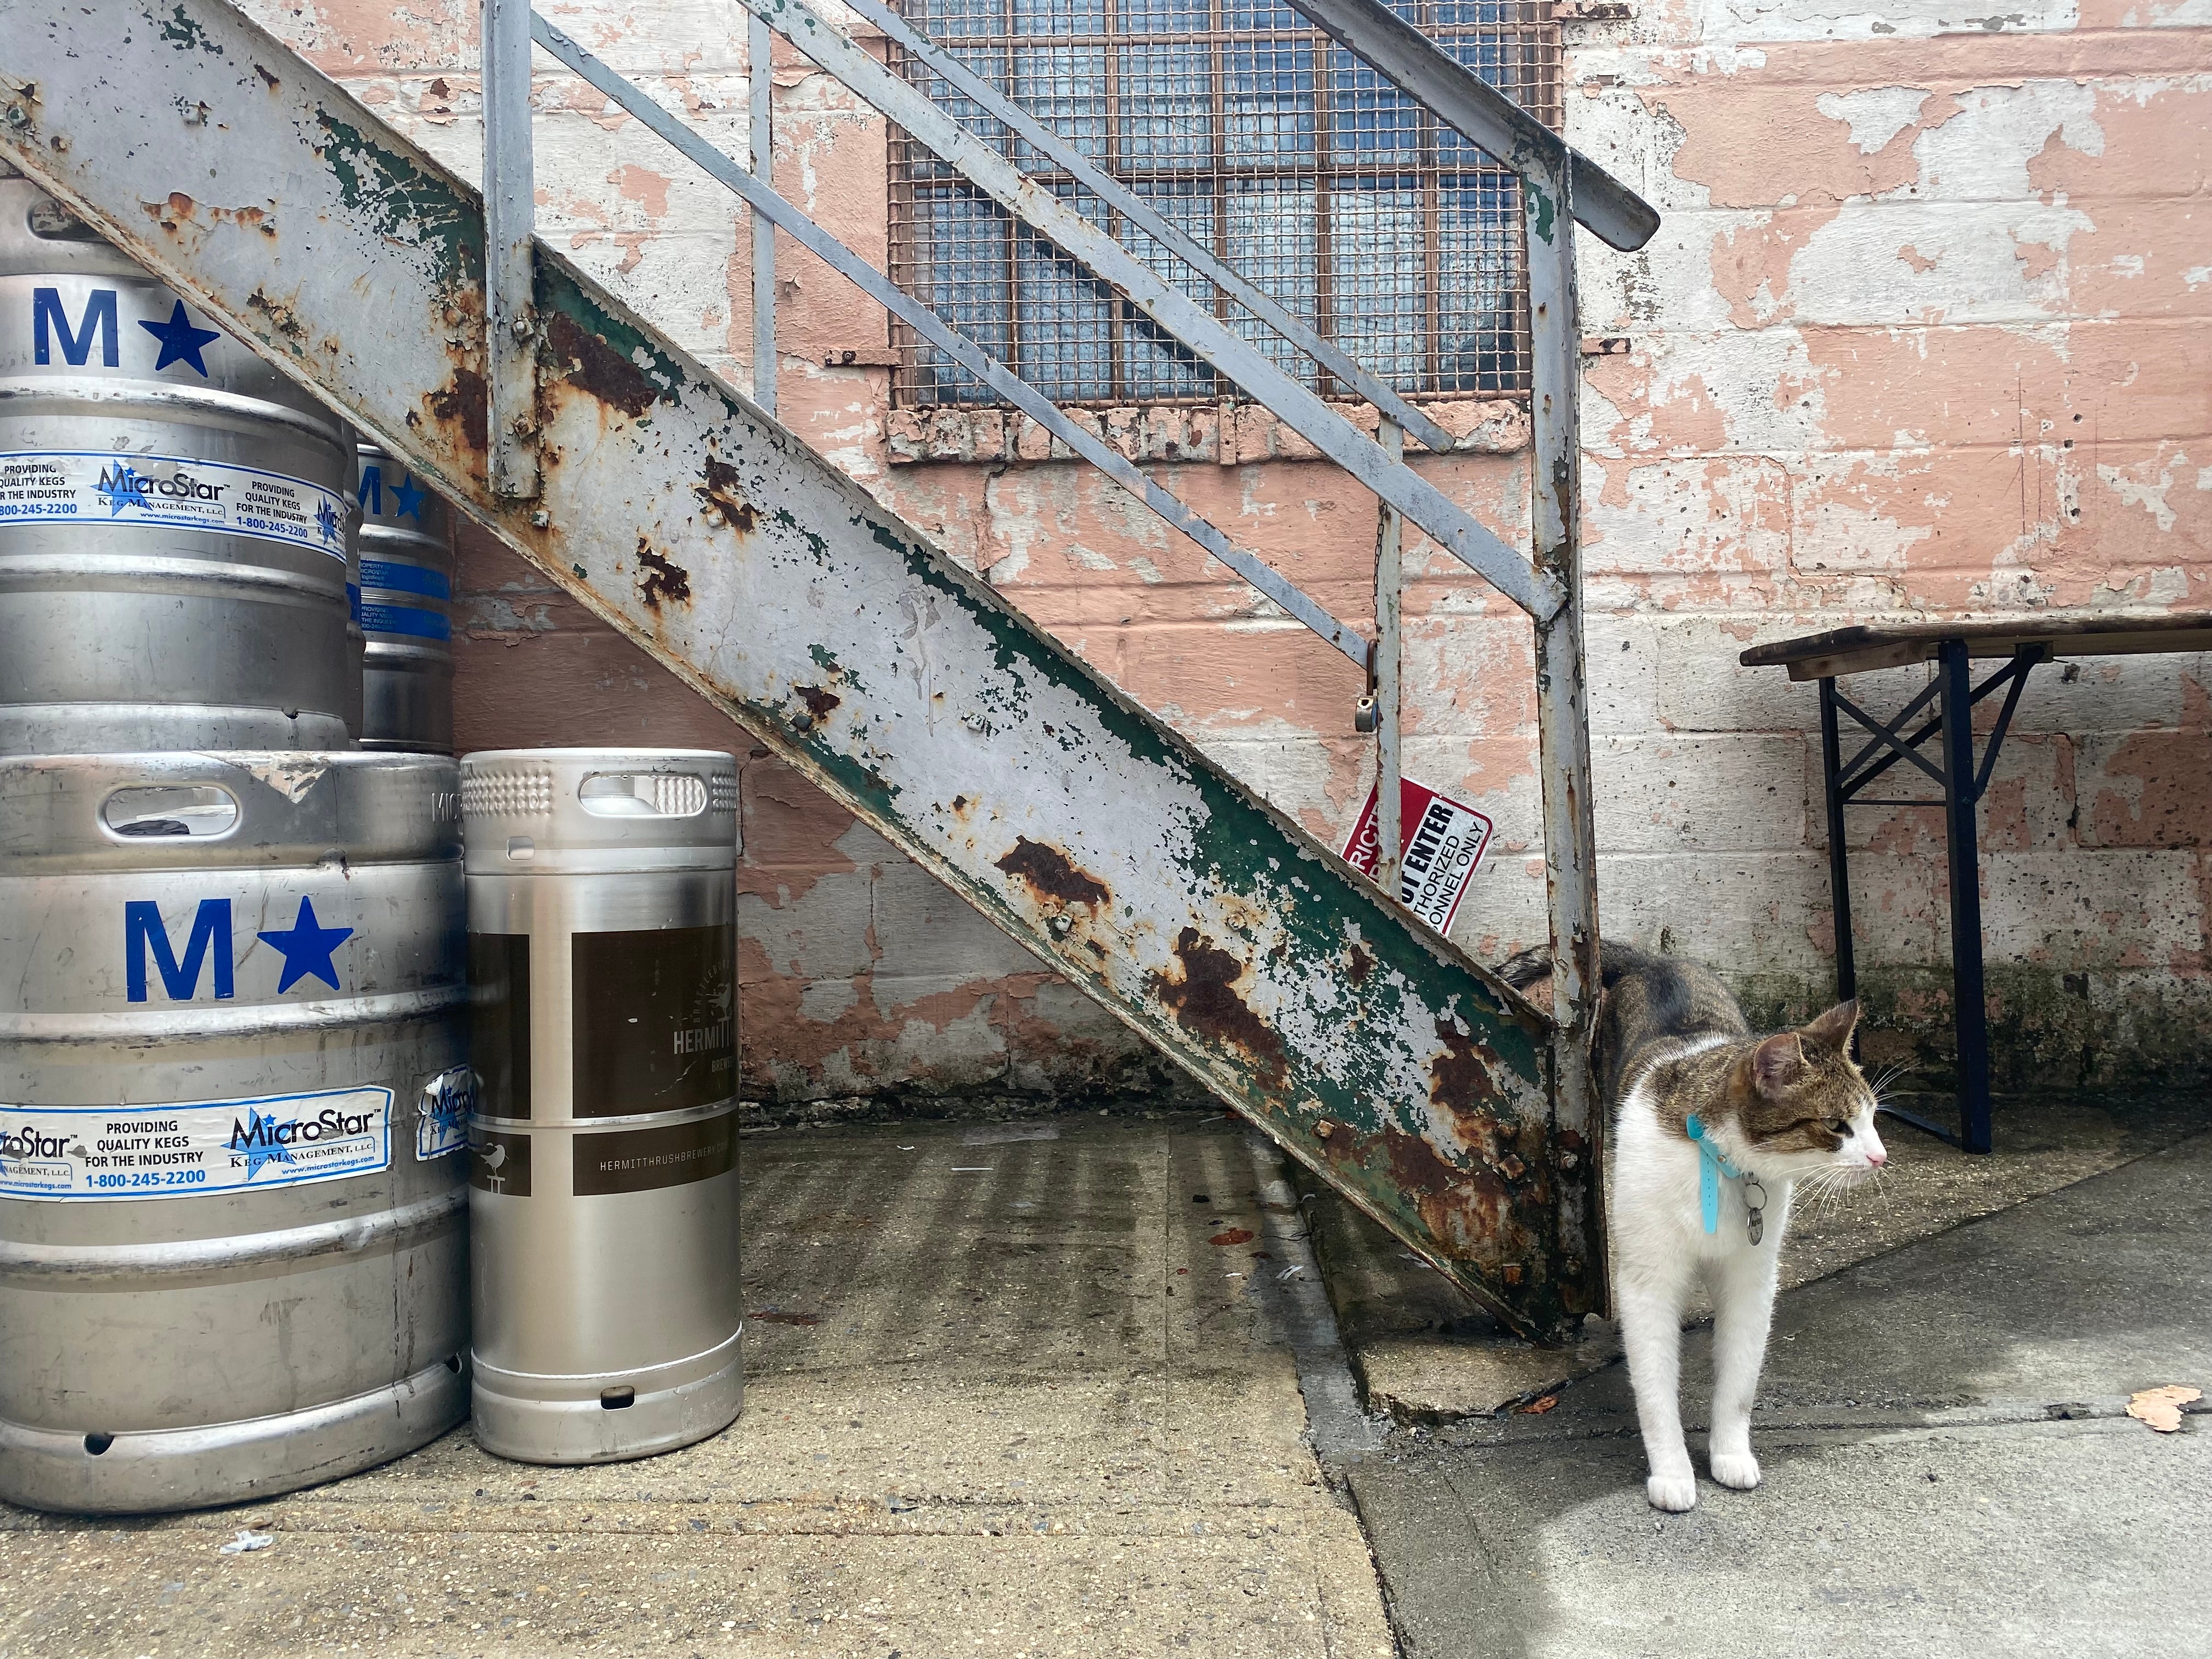 Evil Twin Brewing cat has its own resident moggy